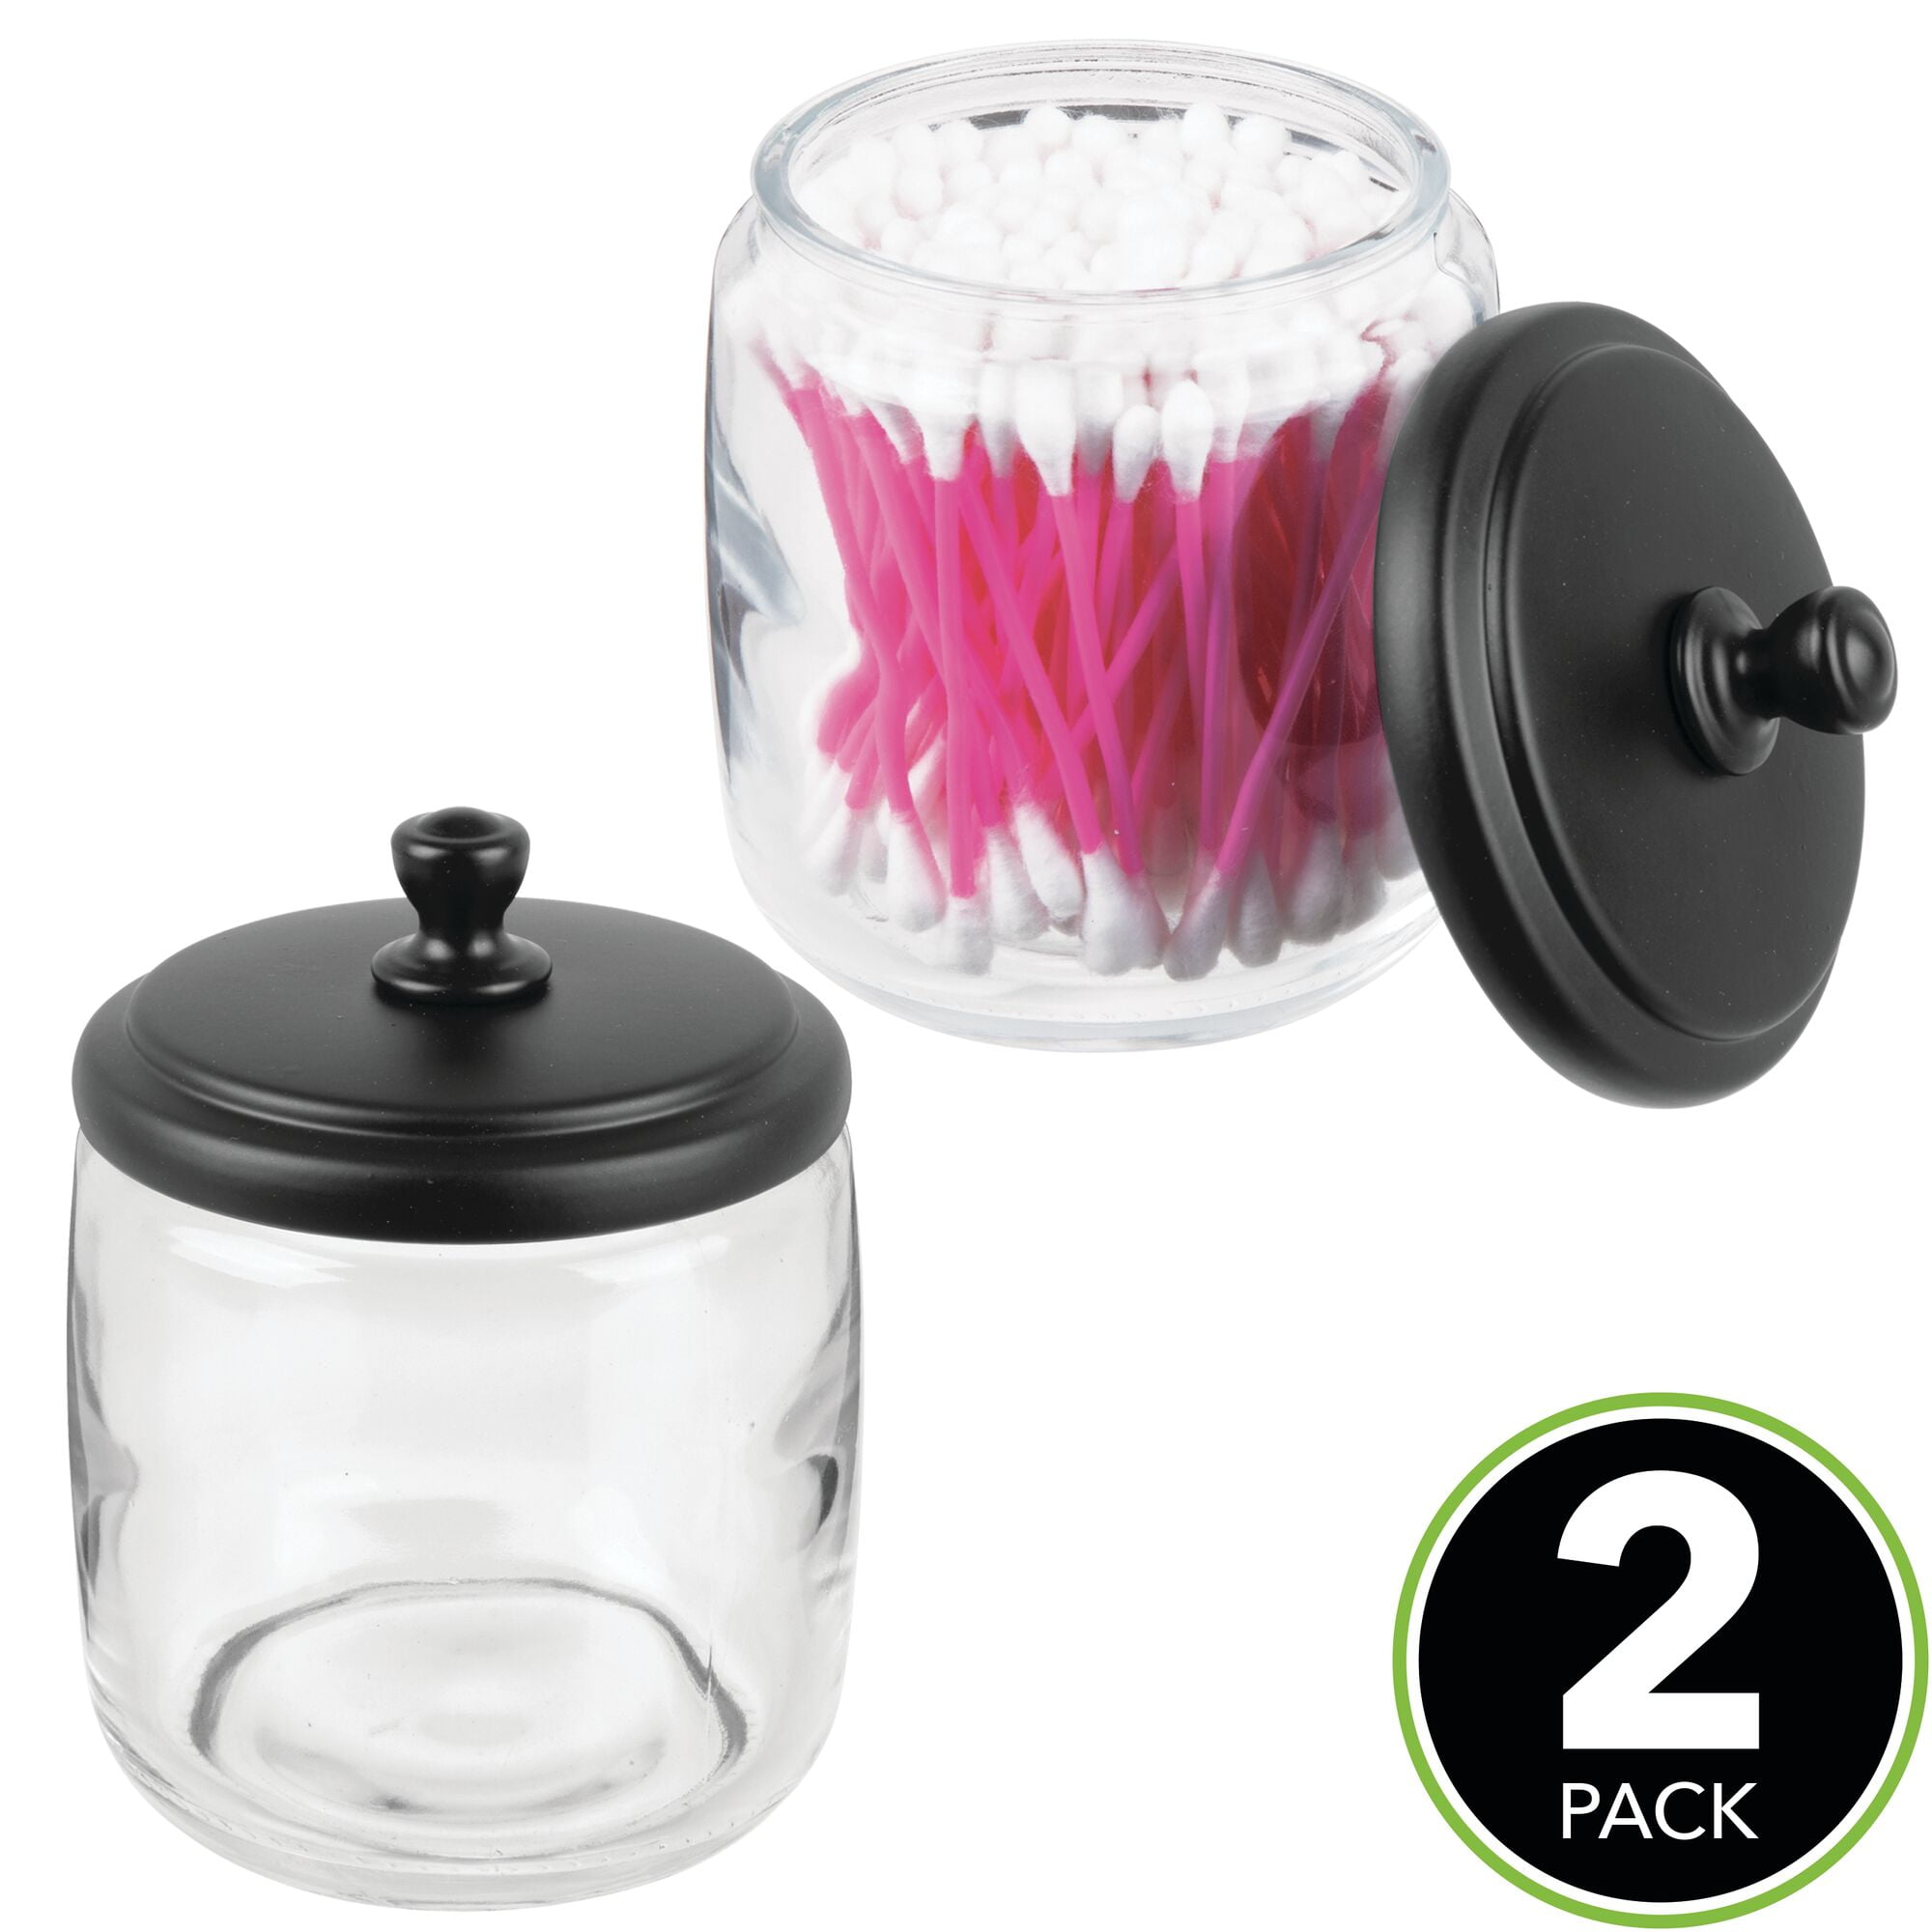 Round Glass Storage Jars, Sets of 2 - Storage Containers - Modern - Kitchen  Canisters …